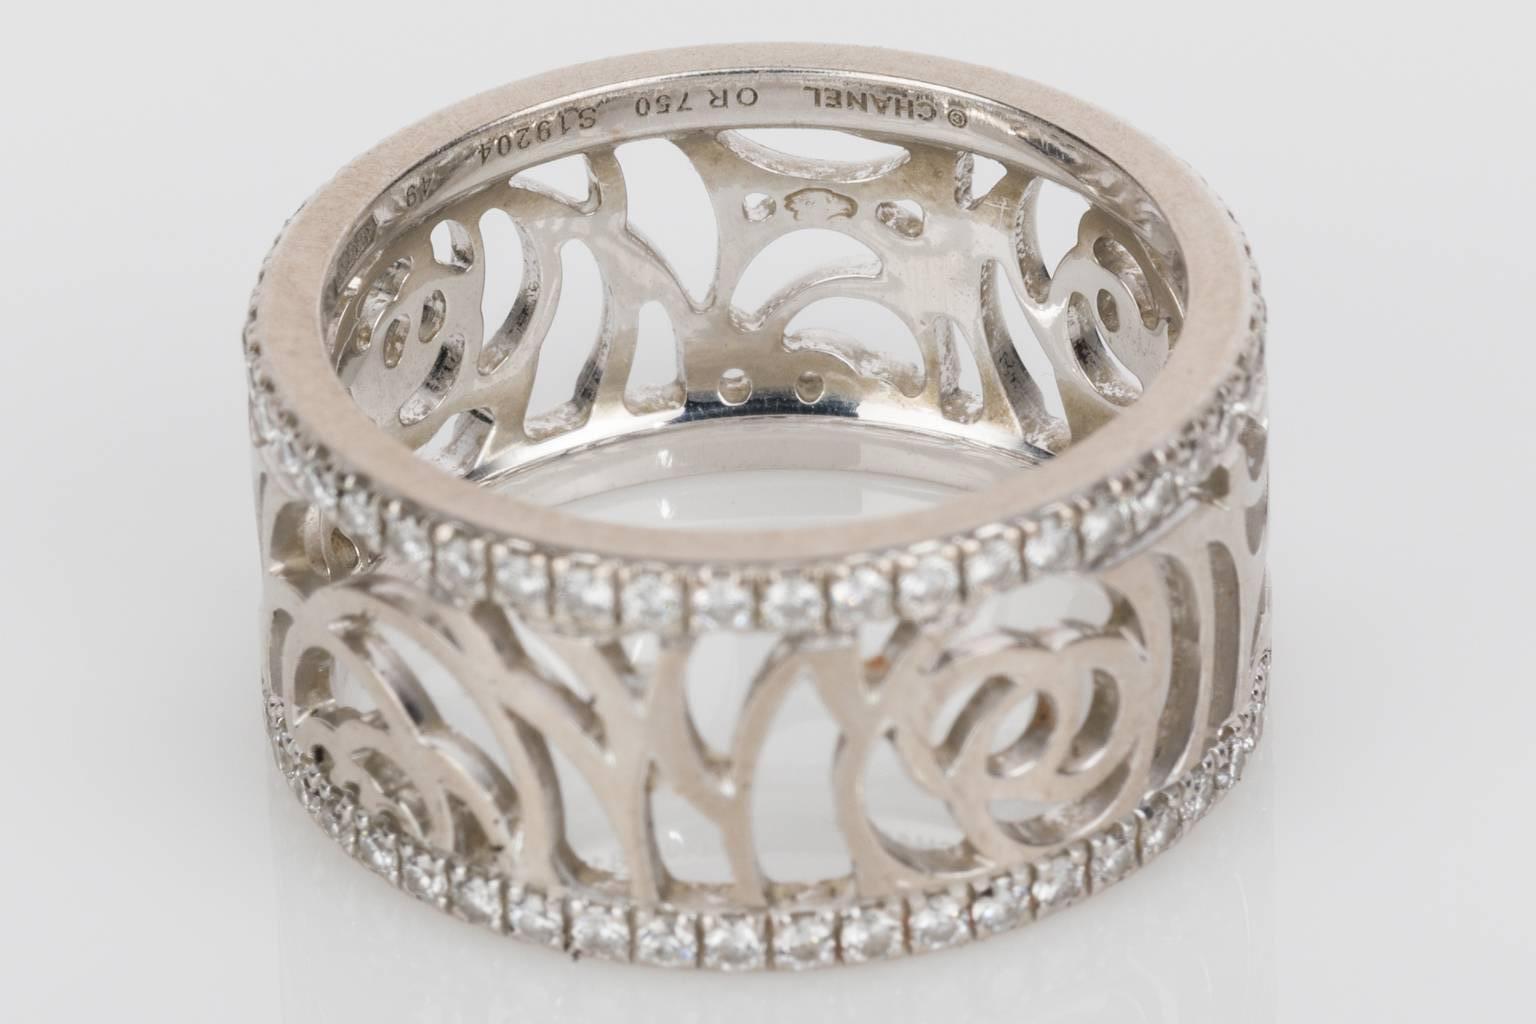 A very pretty 18k white gold Chanel Ajoure Diamond band ring, circa 2012. Set with approximately 0.40cts of brilliant cut white diamonds along the two edges of the ring with the pierced band replicating the camelia motif between the two diamond